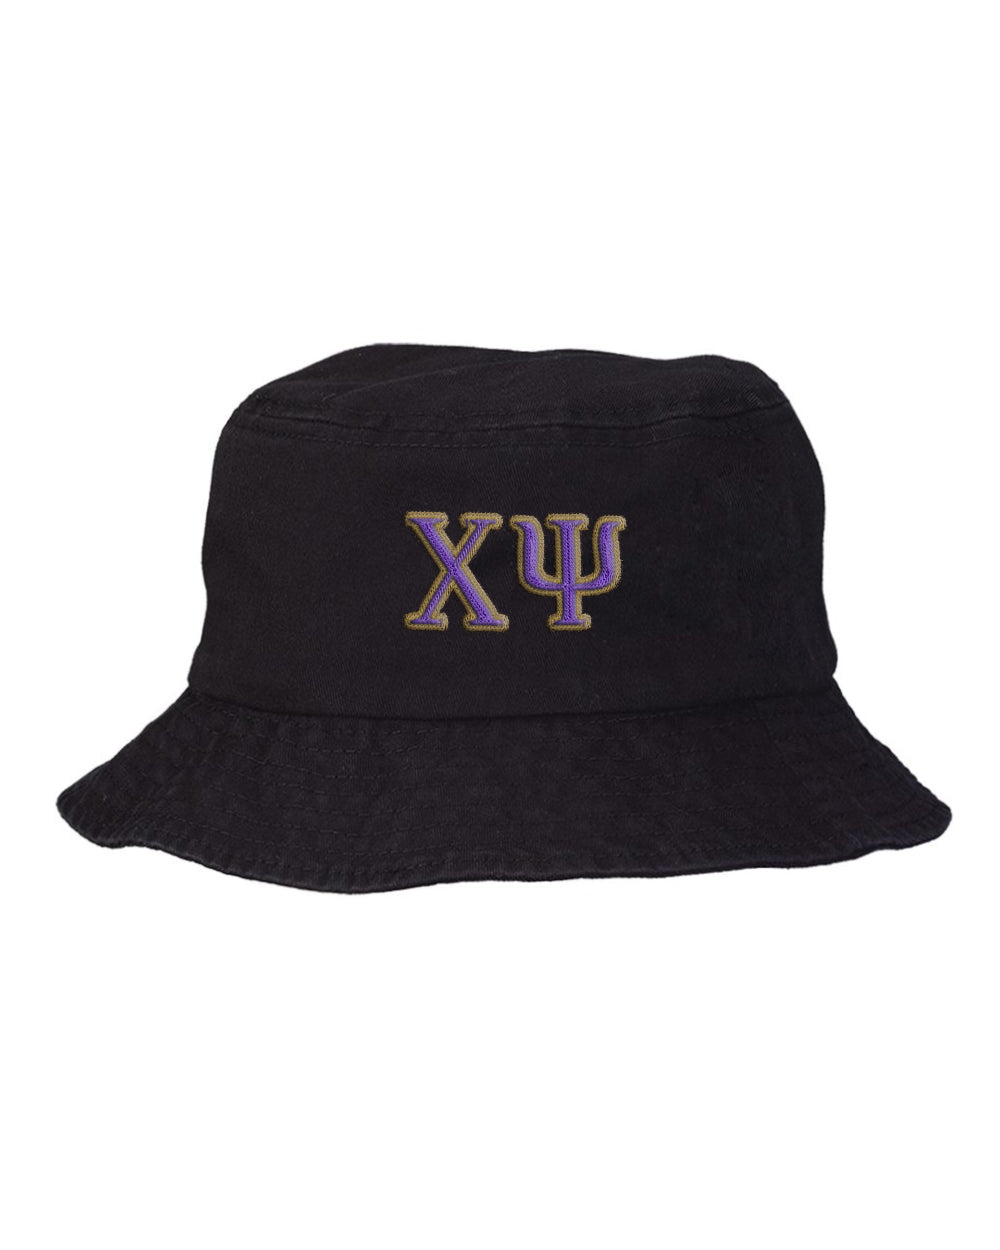 Chi Psi Embroidered Bucket Hat